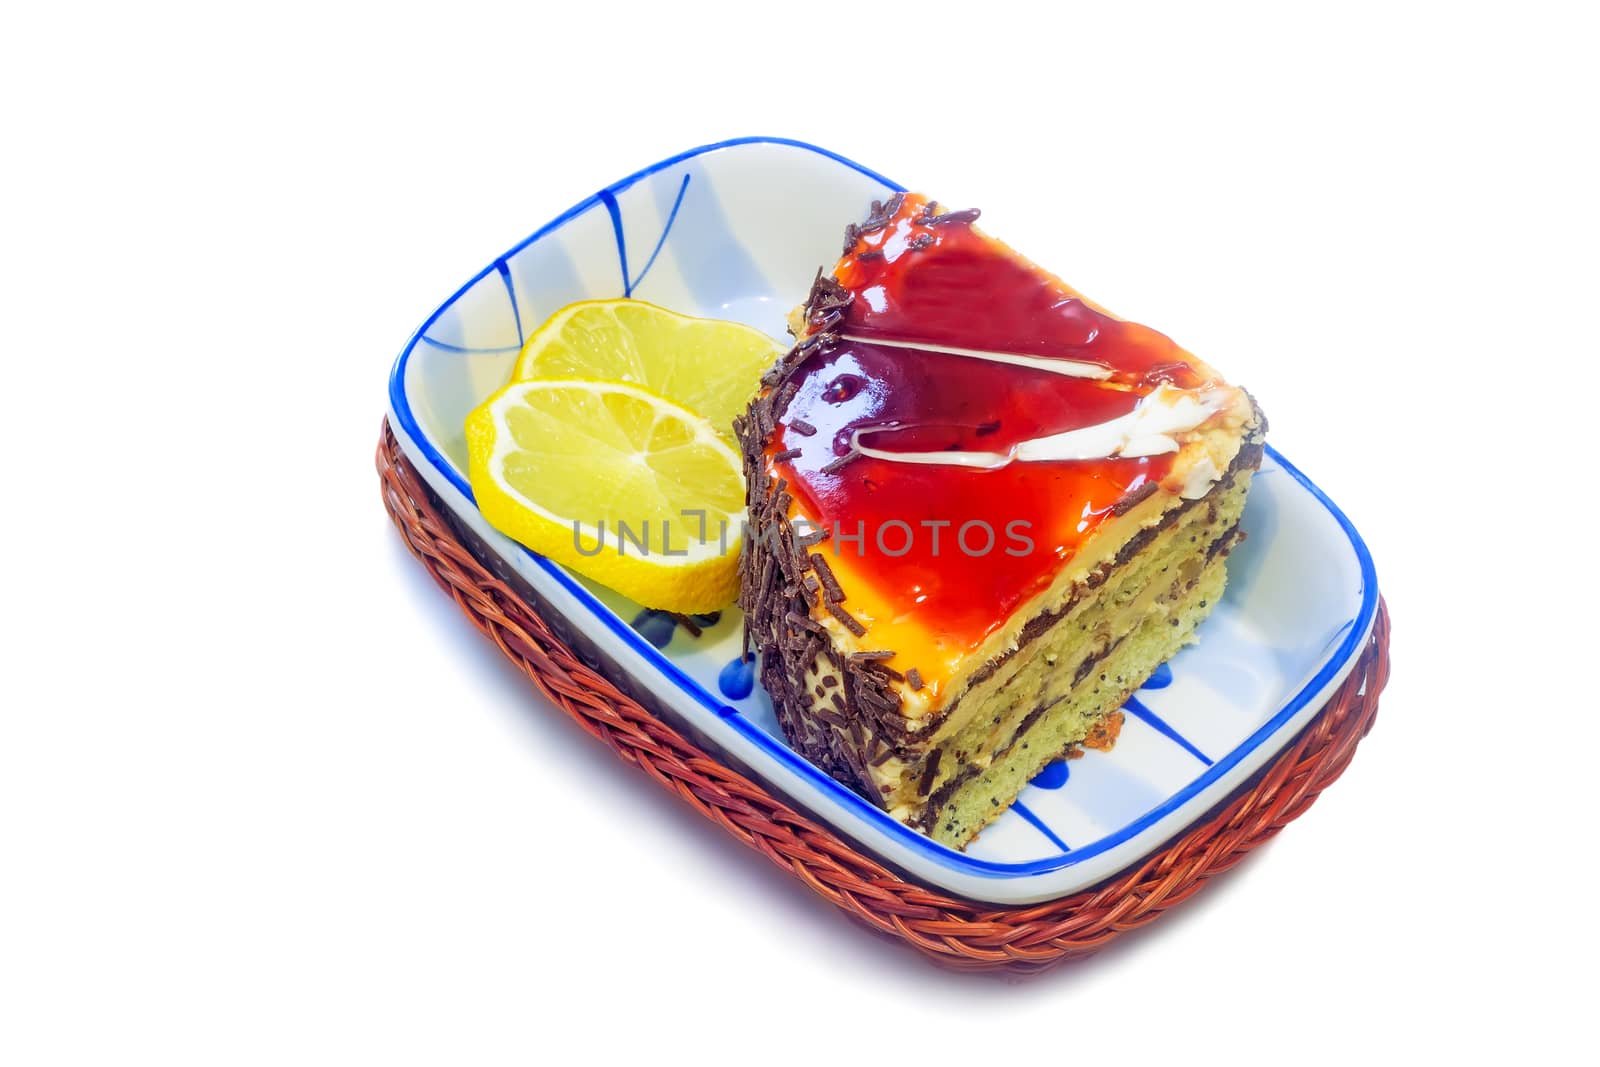 In a beautiful ceramic vase is the dessert: a delicious cake and two slices of lemon. Presented on a white background.